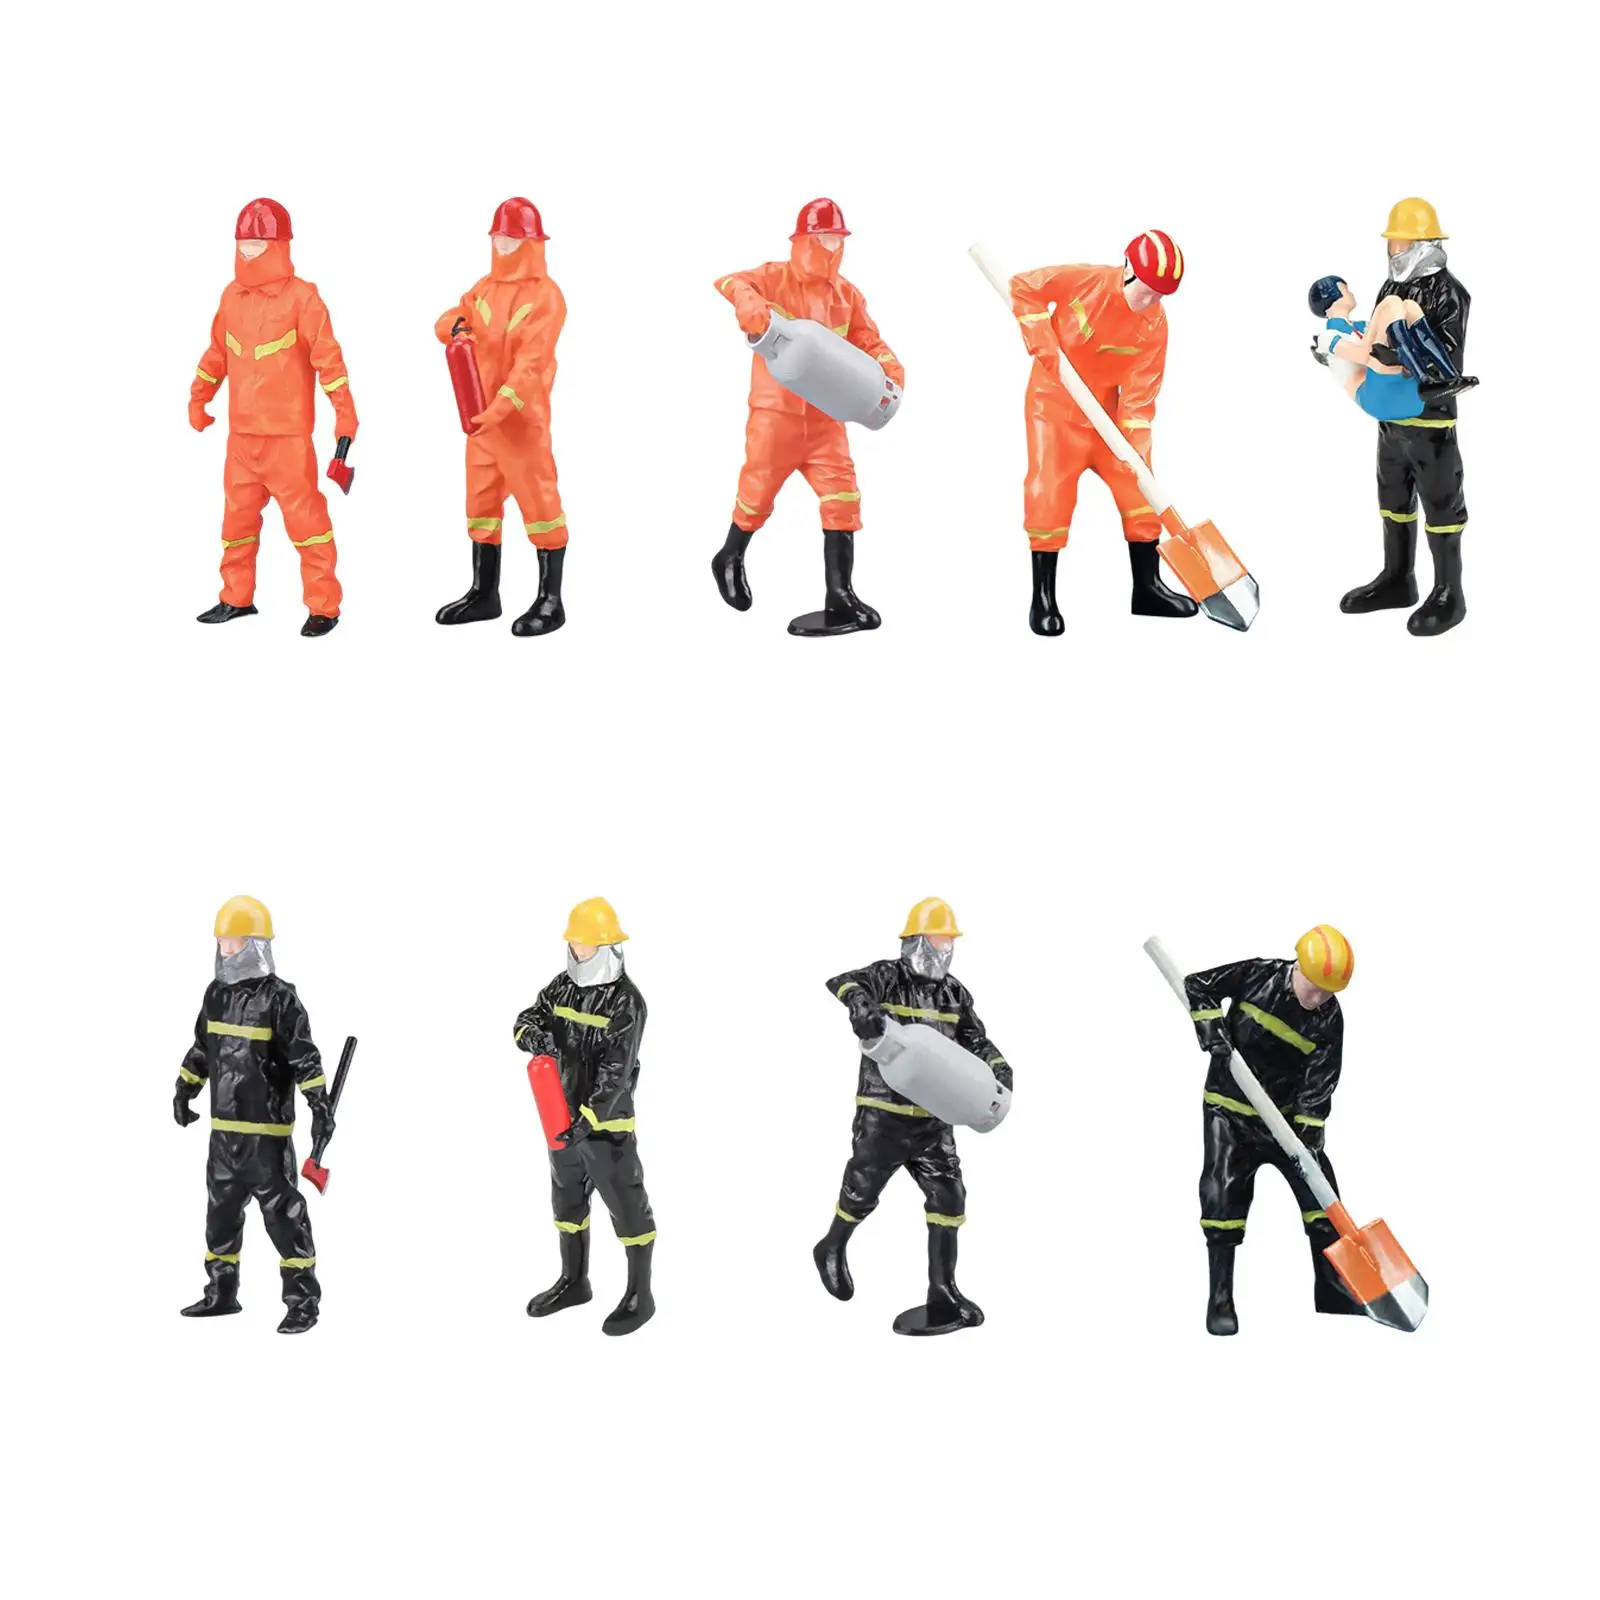 1/32 Models People Figures Fireman Figures for Dollhouse Layout Decoration